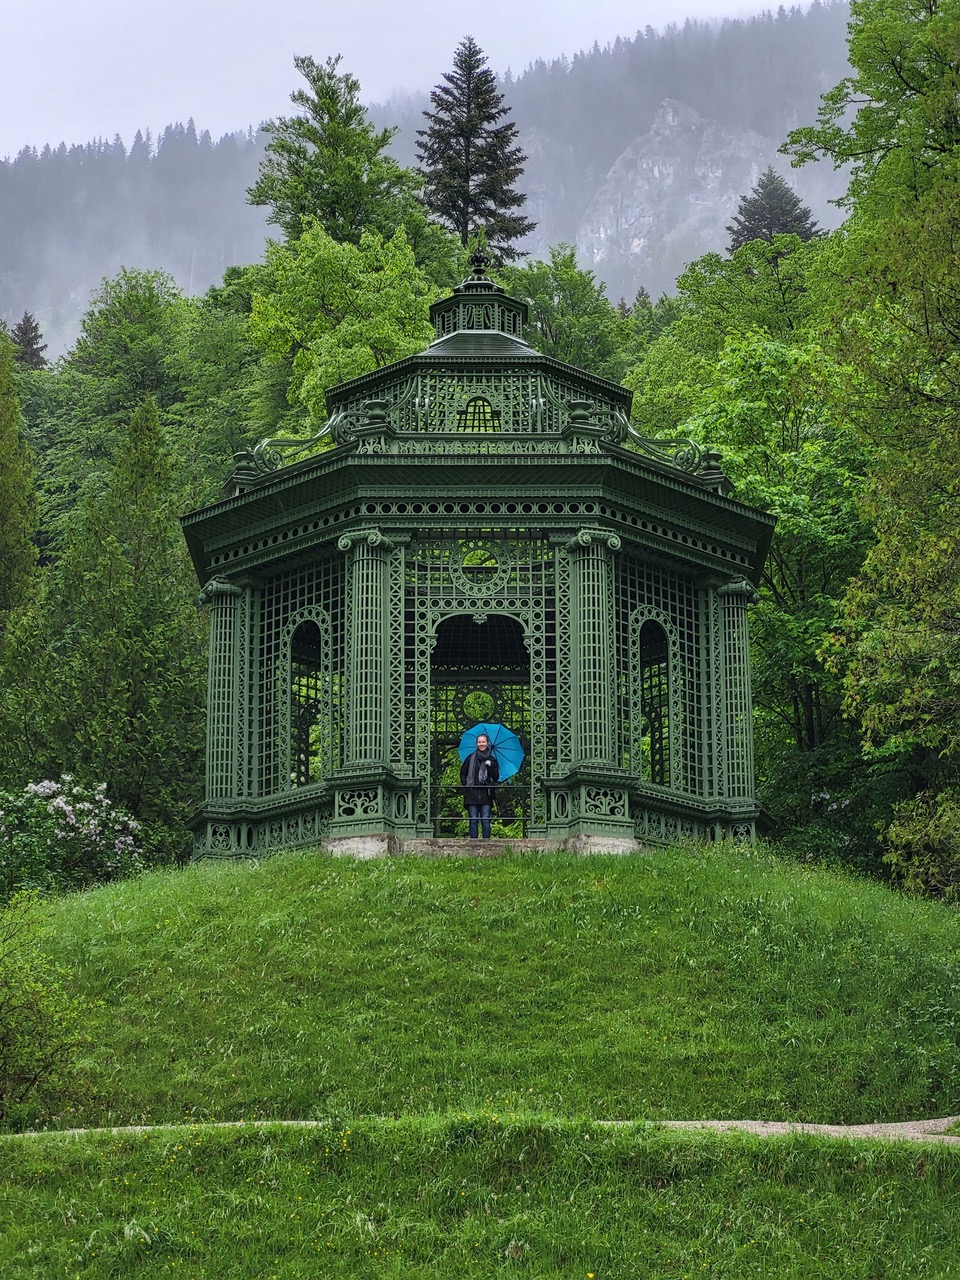 Maddie in the Linderhof palace gardens with blue umbrella